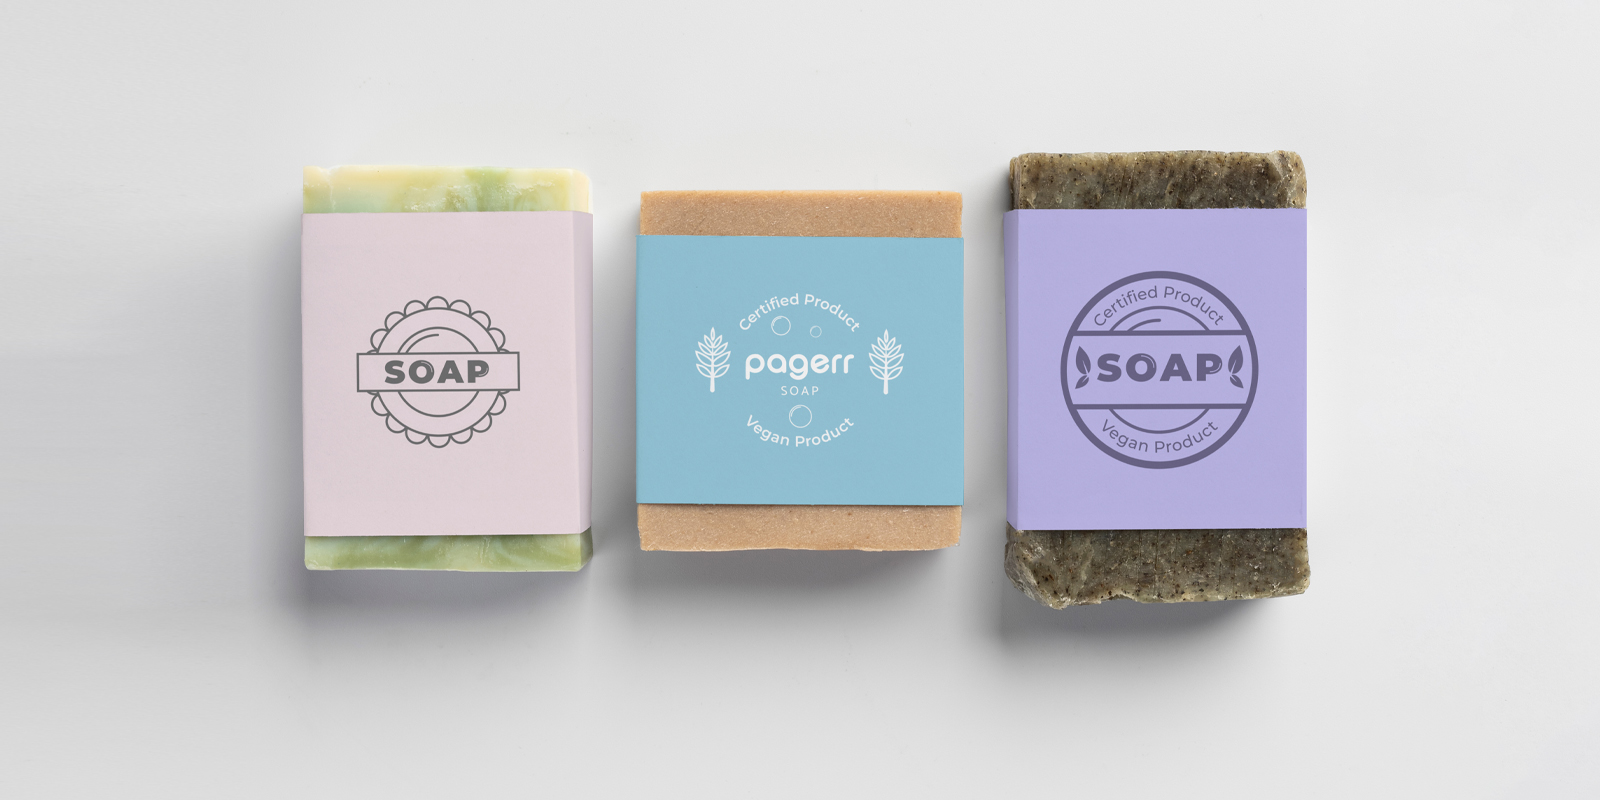 Soap labels in Brisbane - Print with Pagerr